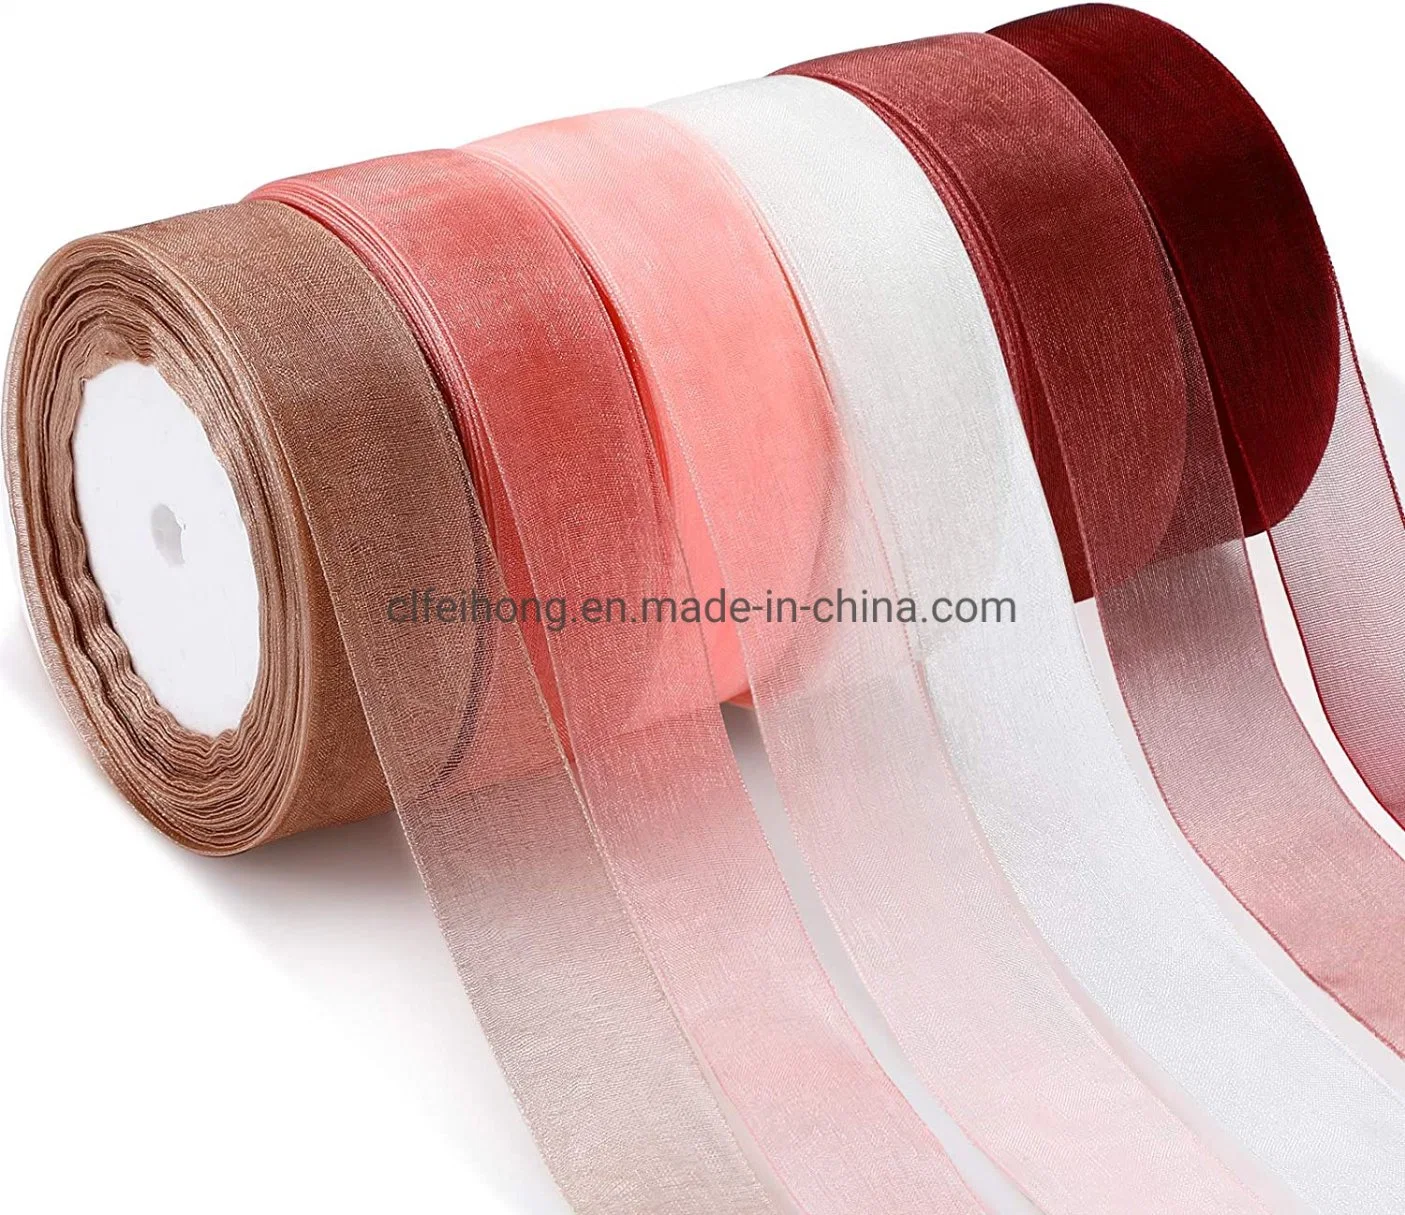 Factory Customized Grosgrain, Metallic, Organza Ribbon with Satin Edge for Wrapping/Garments/Decoration/Gifts/Christmas Box/Garment Accessory